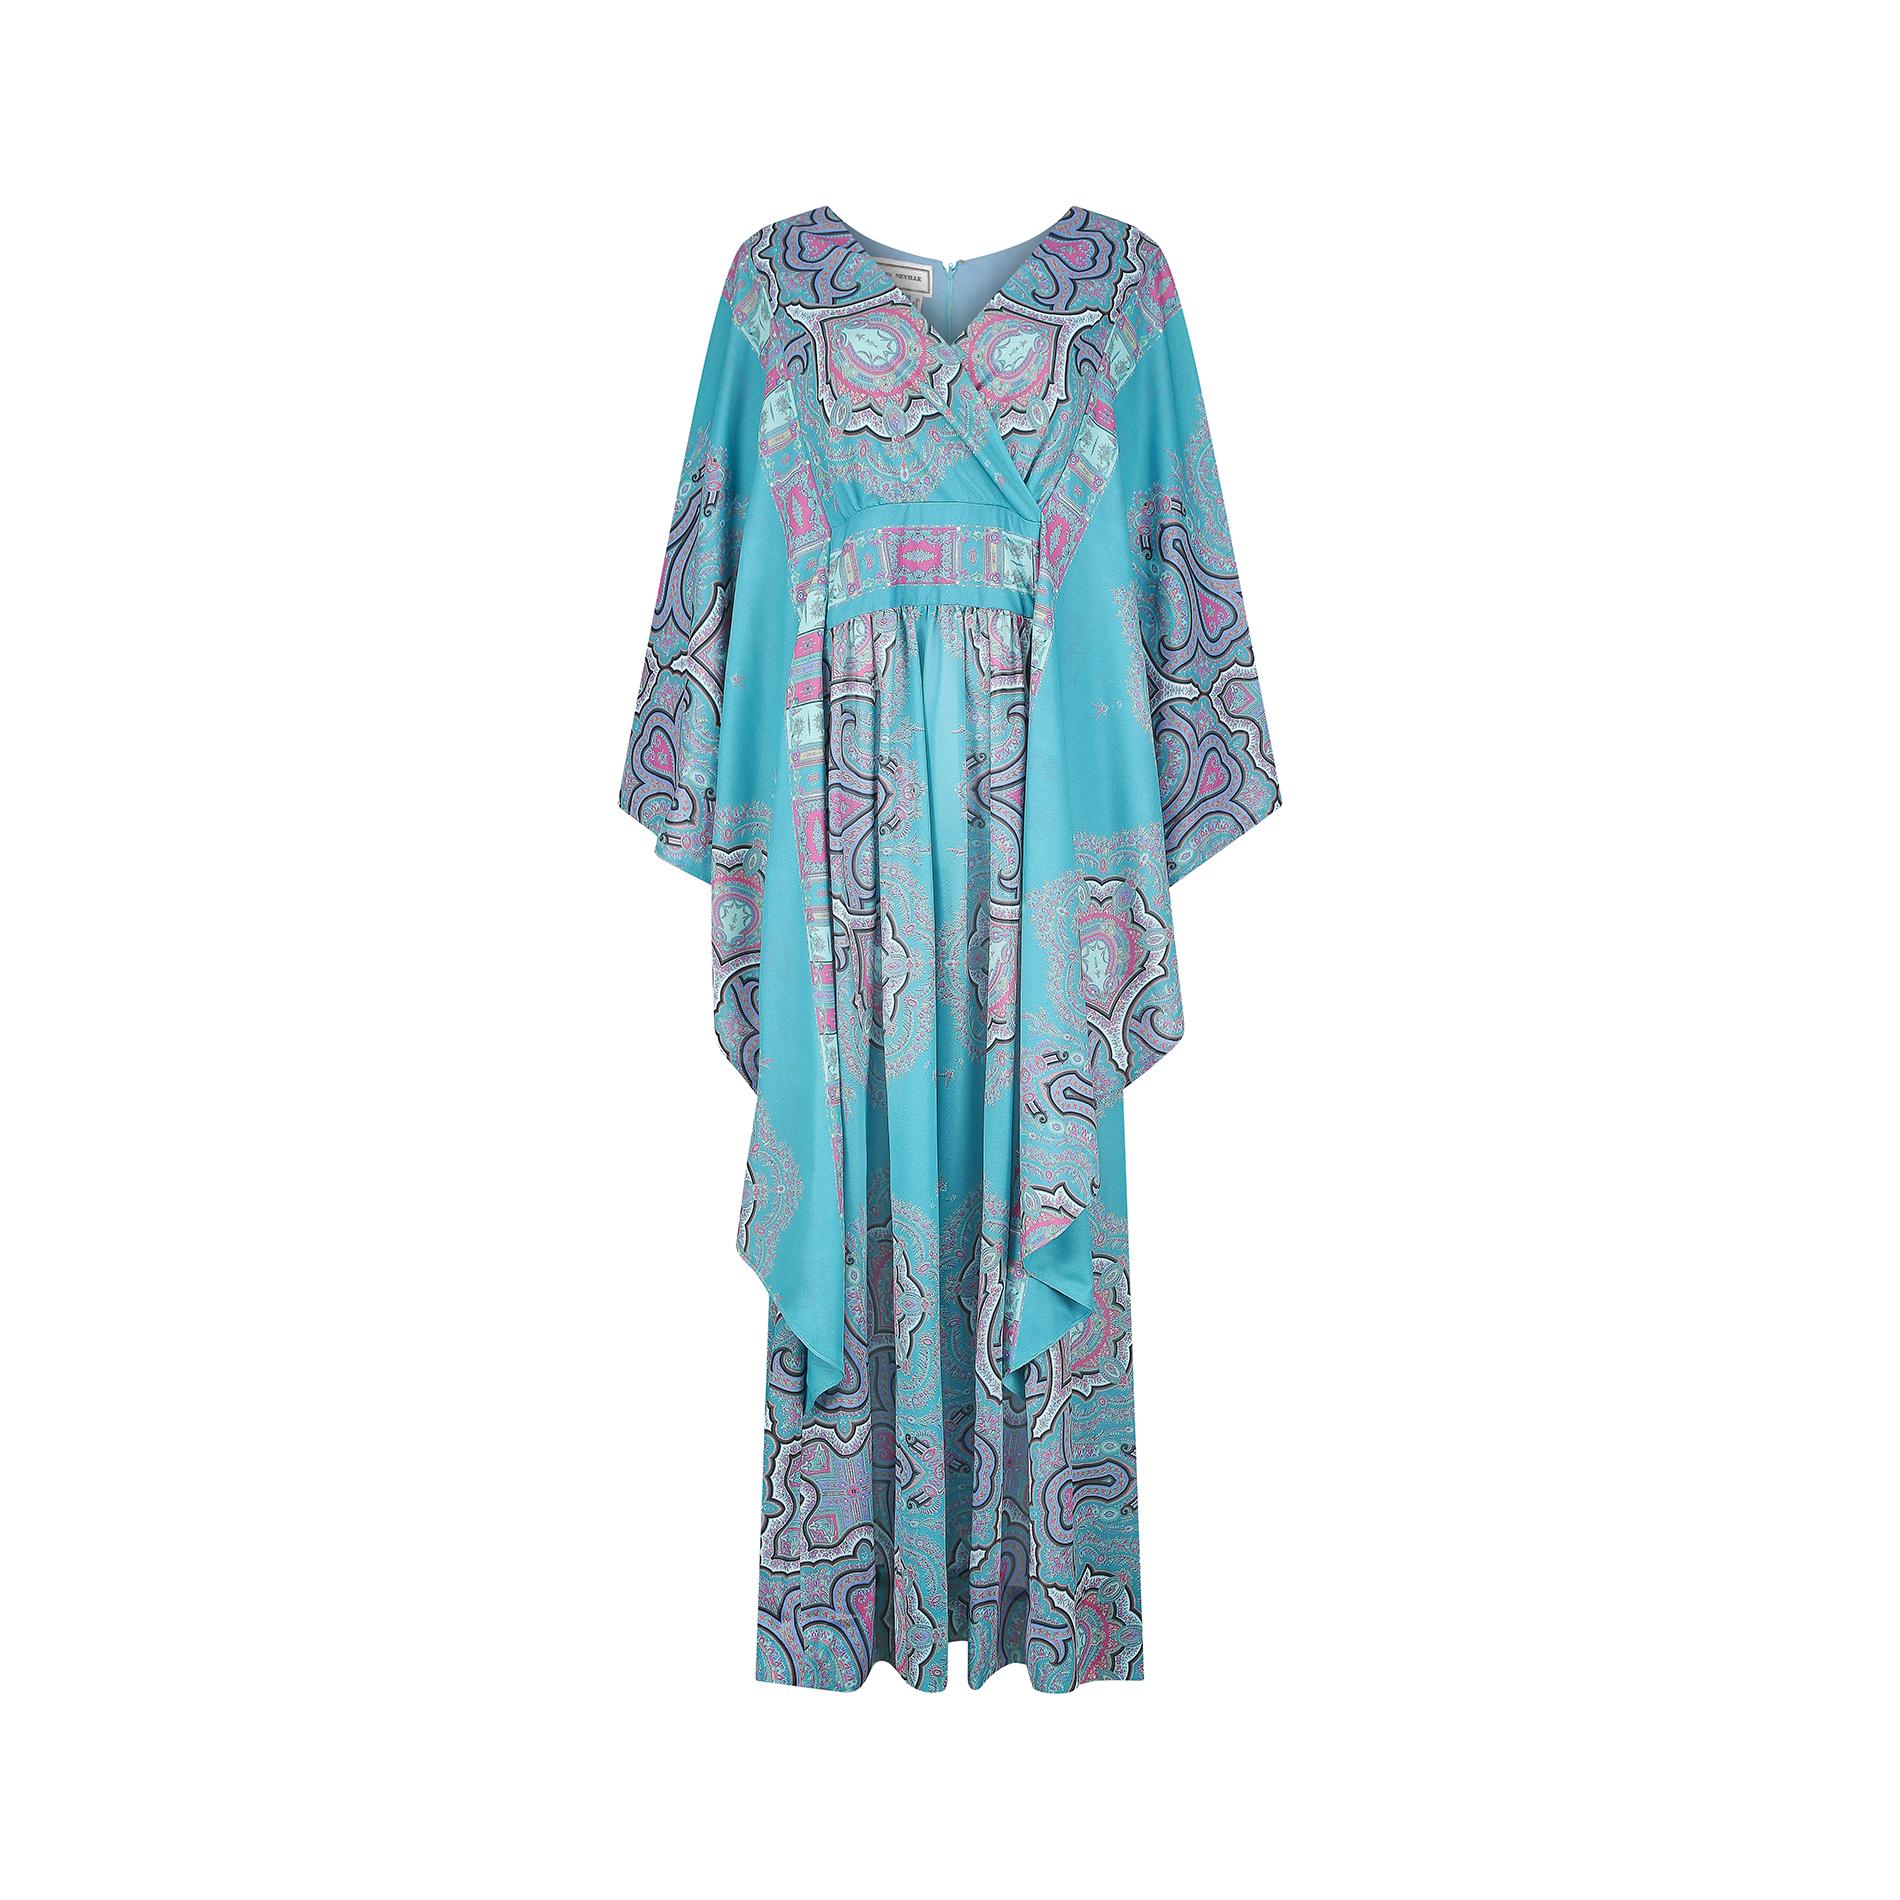 This 1970s John Neville turquoise paisley dress is the perfect pack away dress and made from a high quality polyester yarn with a lined bodice. It has a V-neck crossover front, wide empire line waistband and flowing, kaftan style sleeves. The front